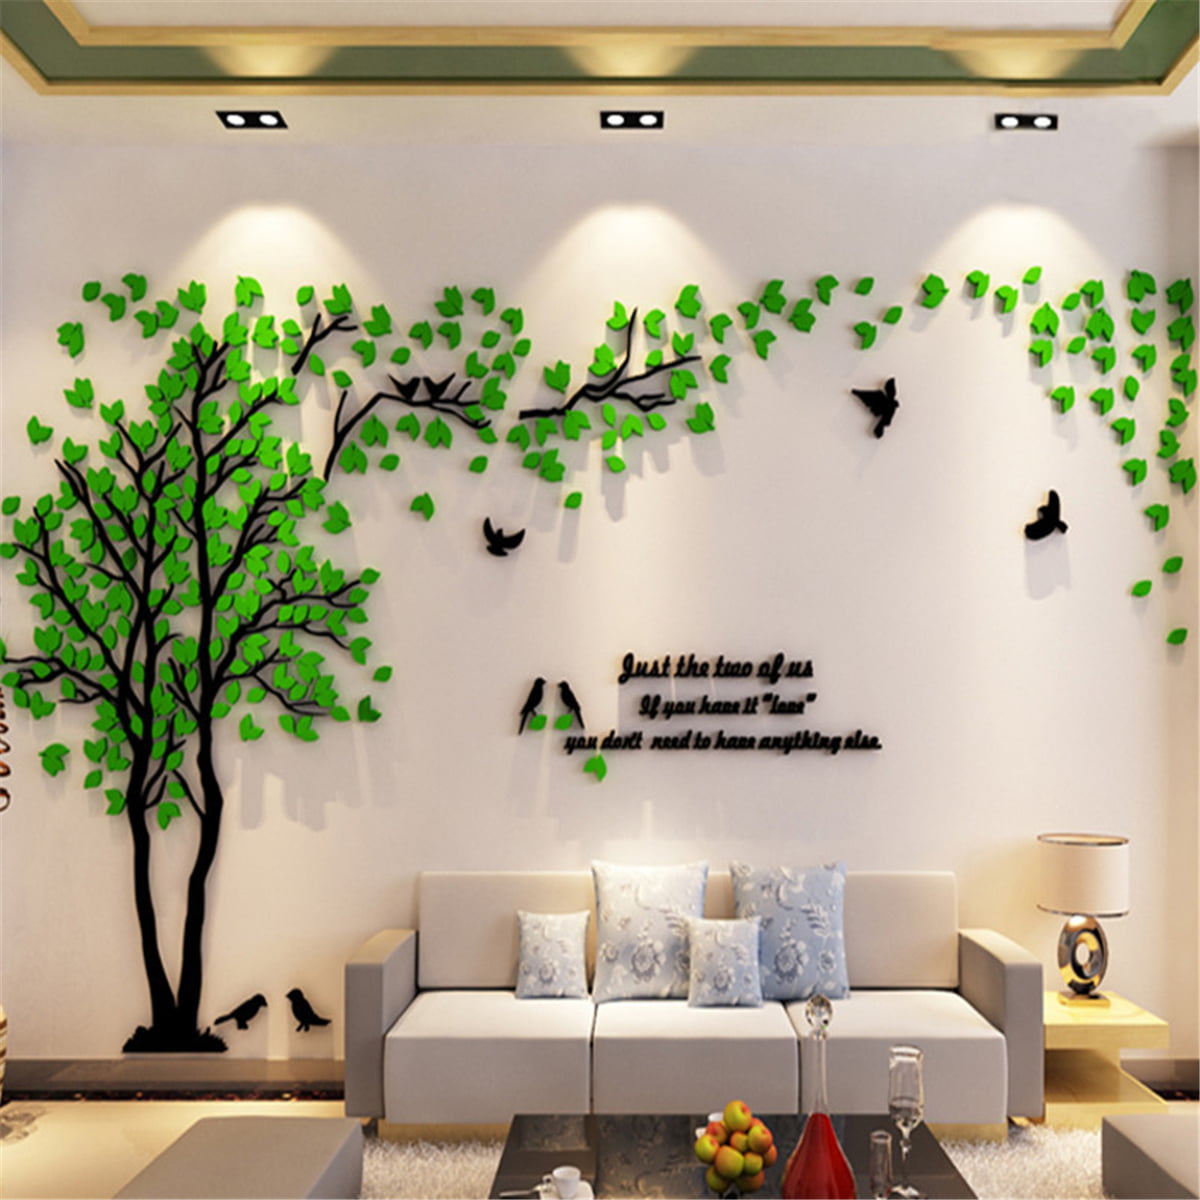 Details about   Family Tree Wall Decal Stickers Large Vinyl Frame Art DIY Mural Home Decor Stick 